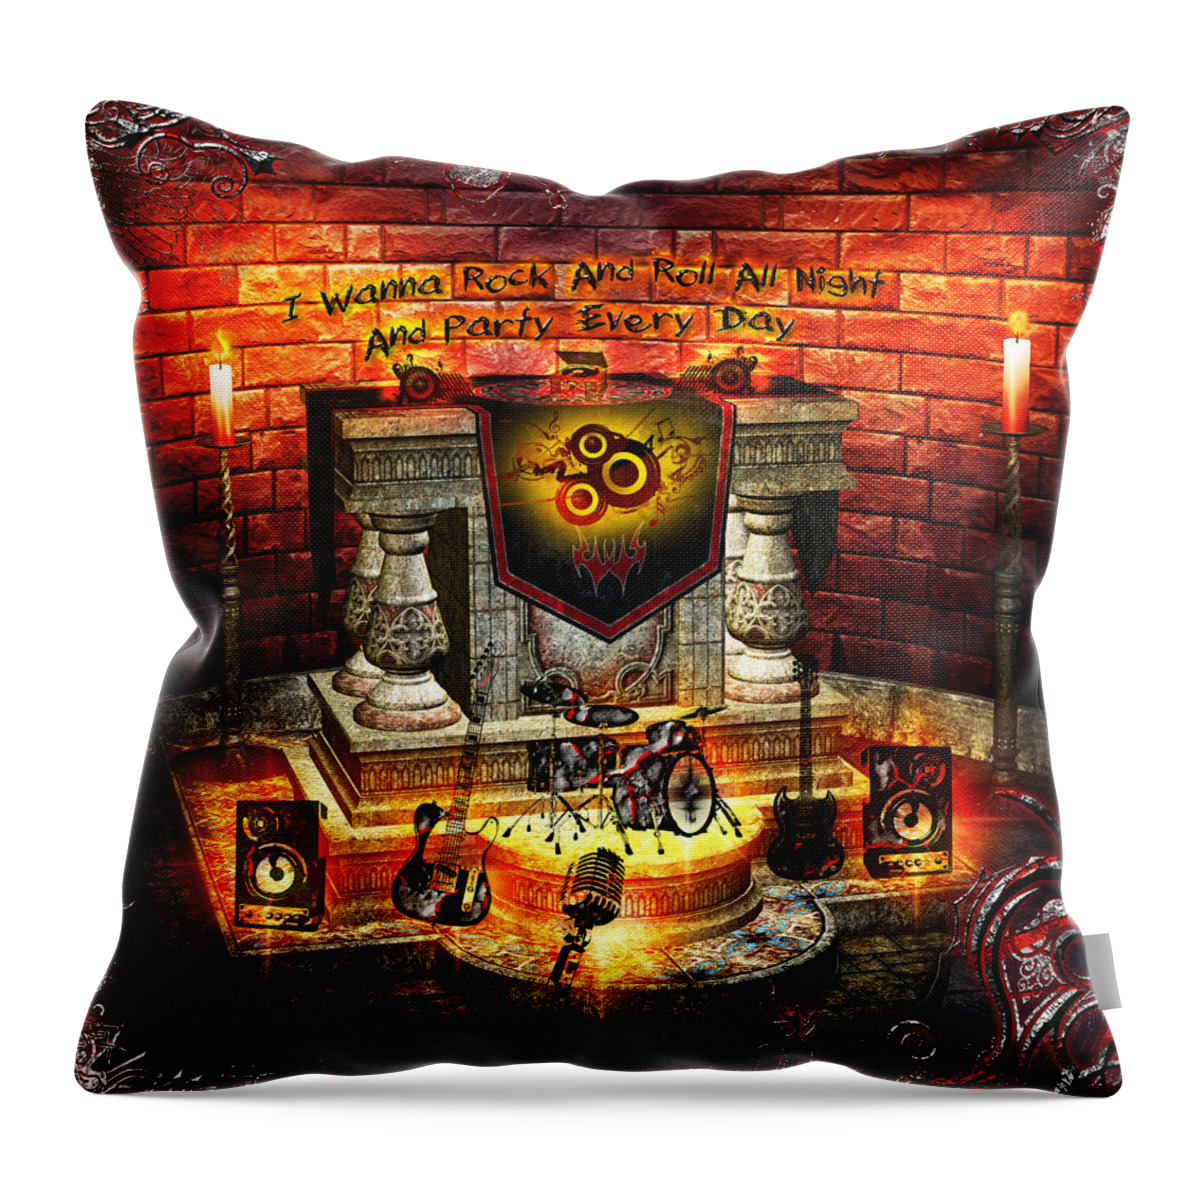 Rock Music Throw Pillow featuring the digital art I Want To Rock by Michael Damiani